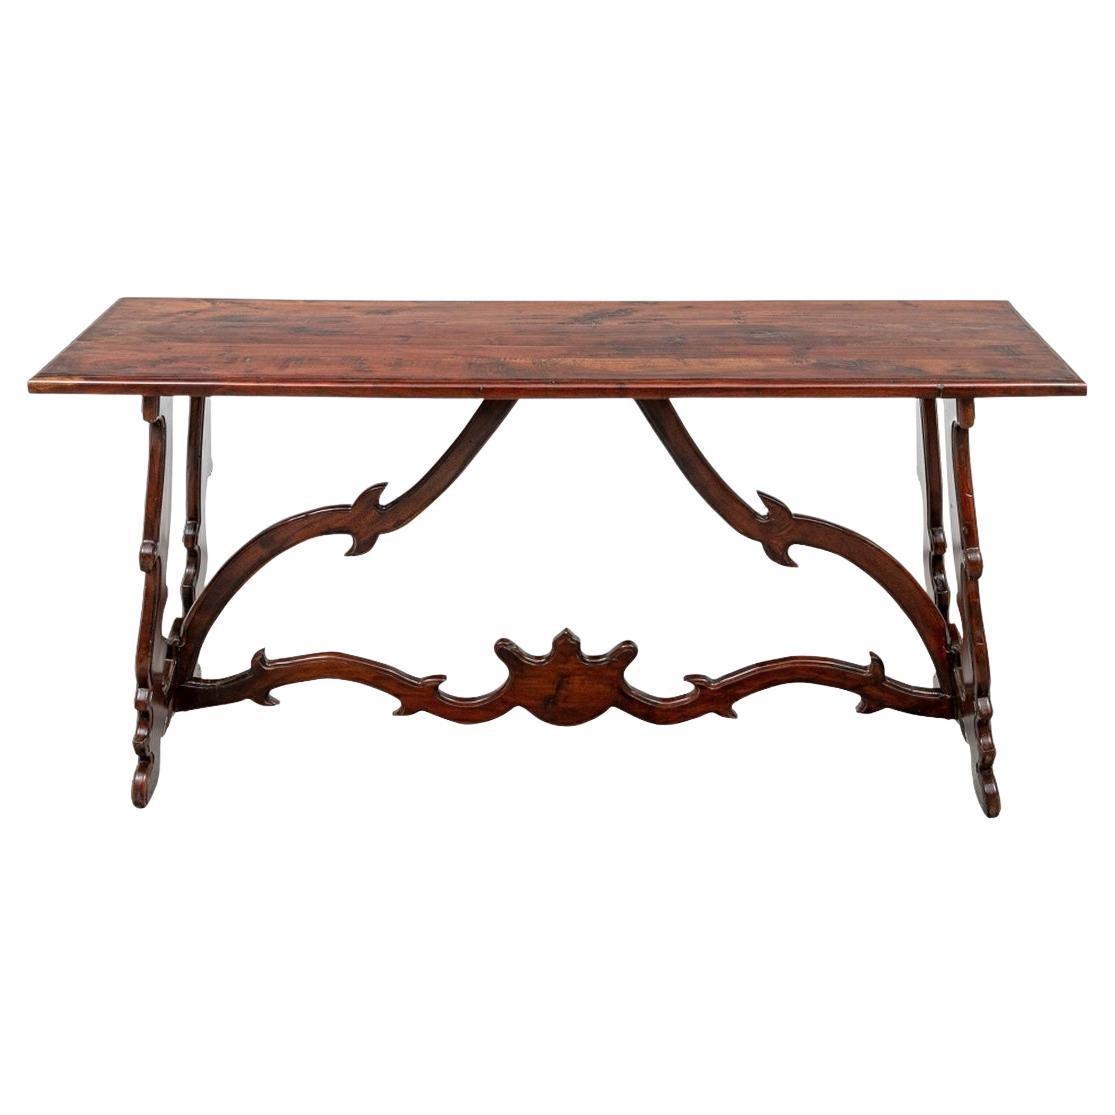 Carved Mahogany Trestle Console Table In Spanish Colonial Style 